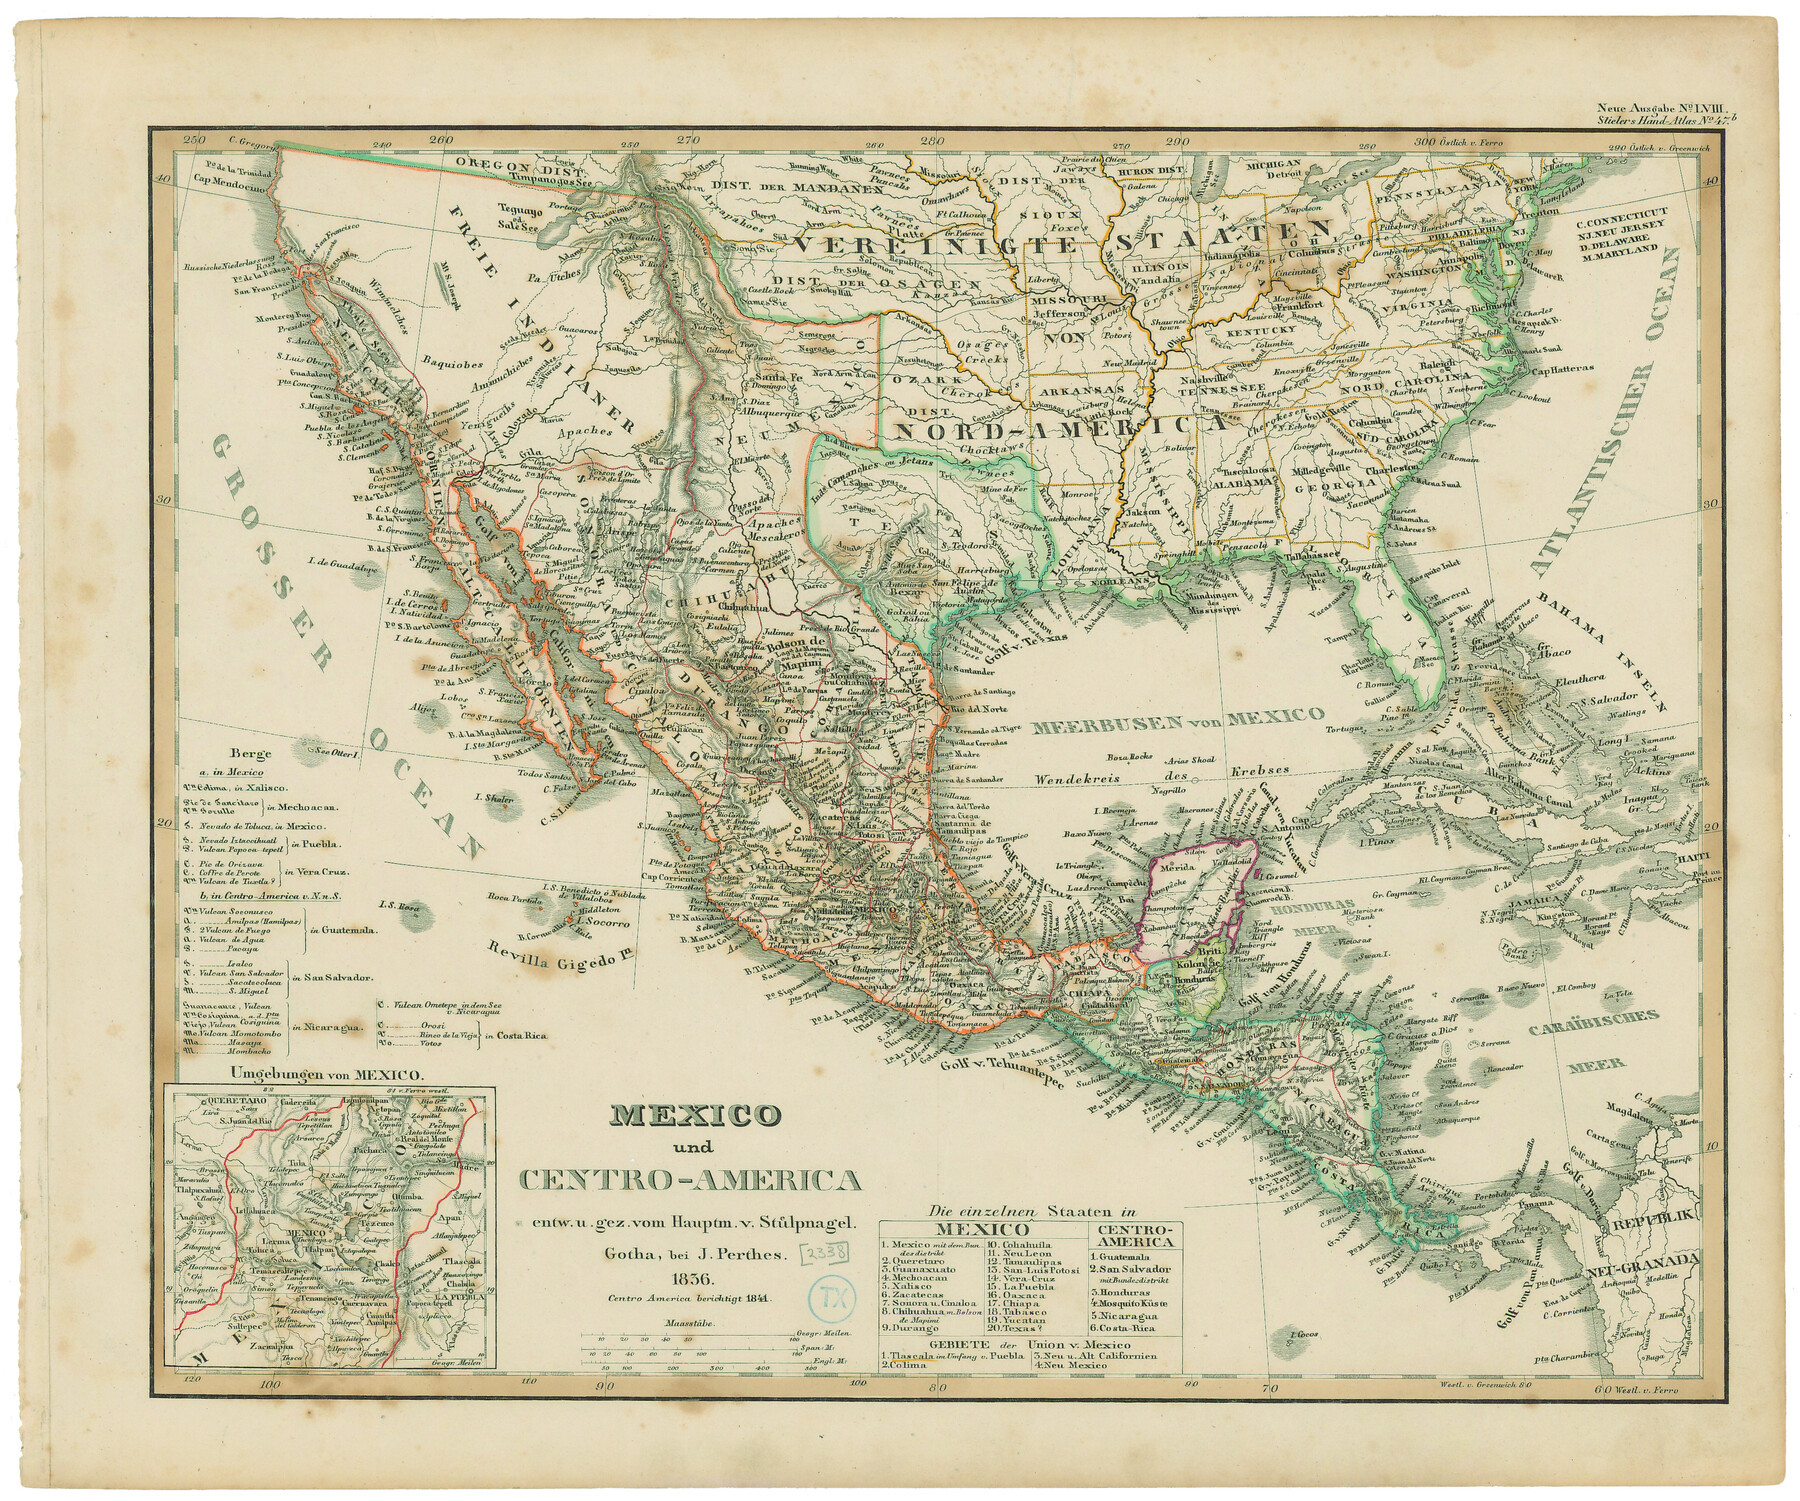 79732, Mexico und Centro-America, Texas State Library and Archives